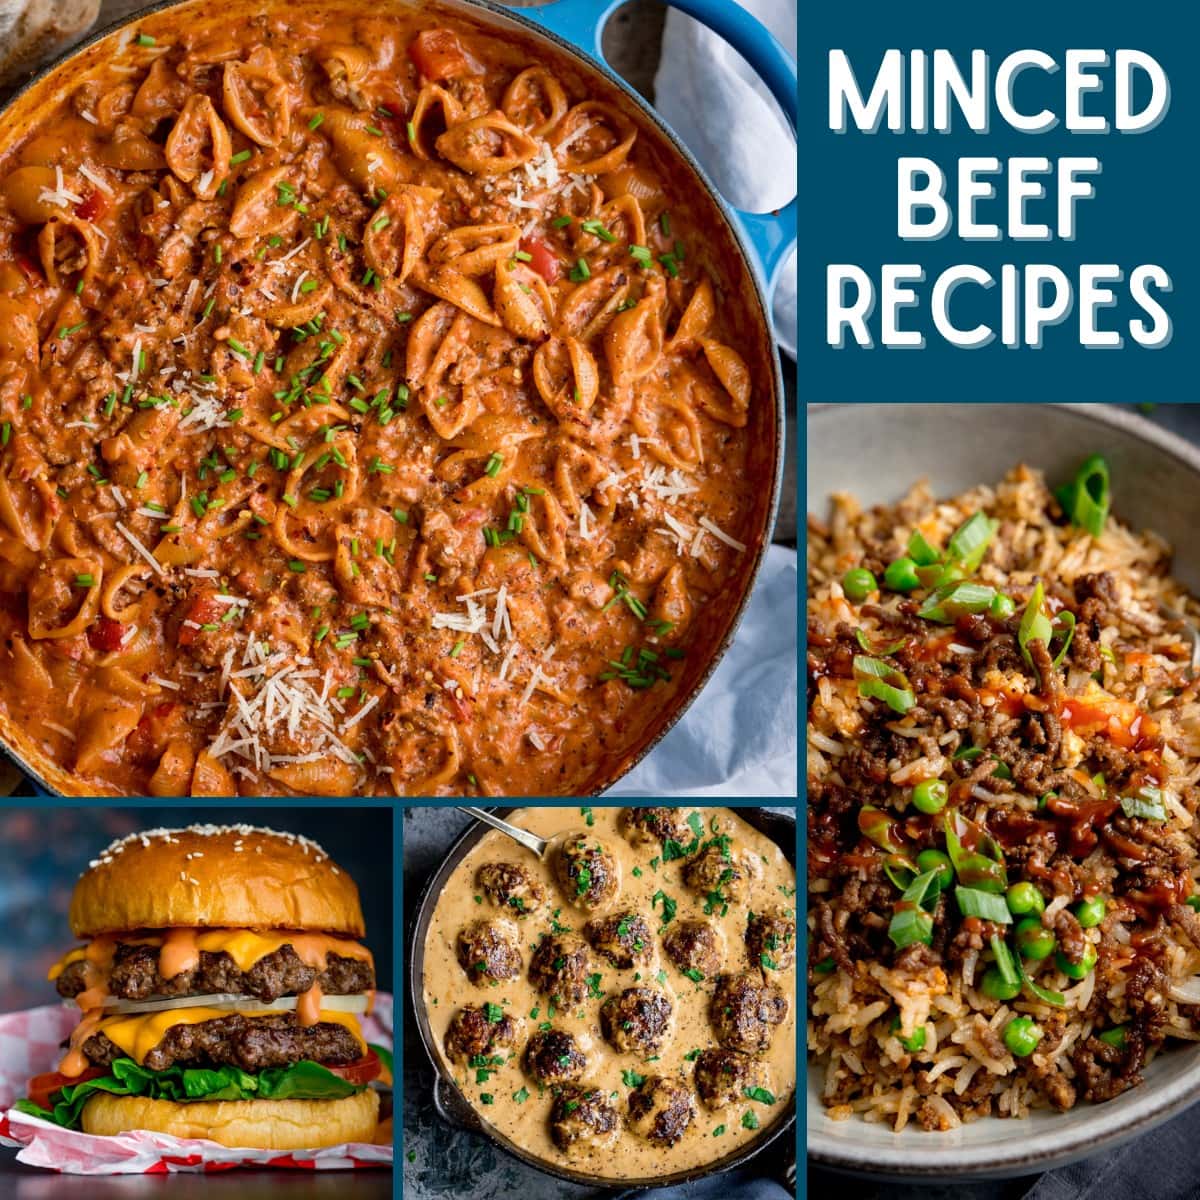 Collage of 4 pictures showing different recipes that can been made with minced beef.